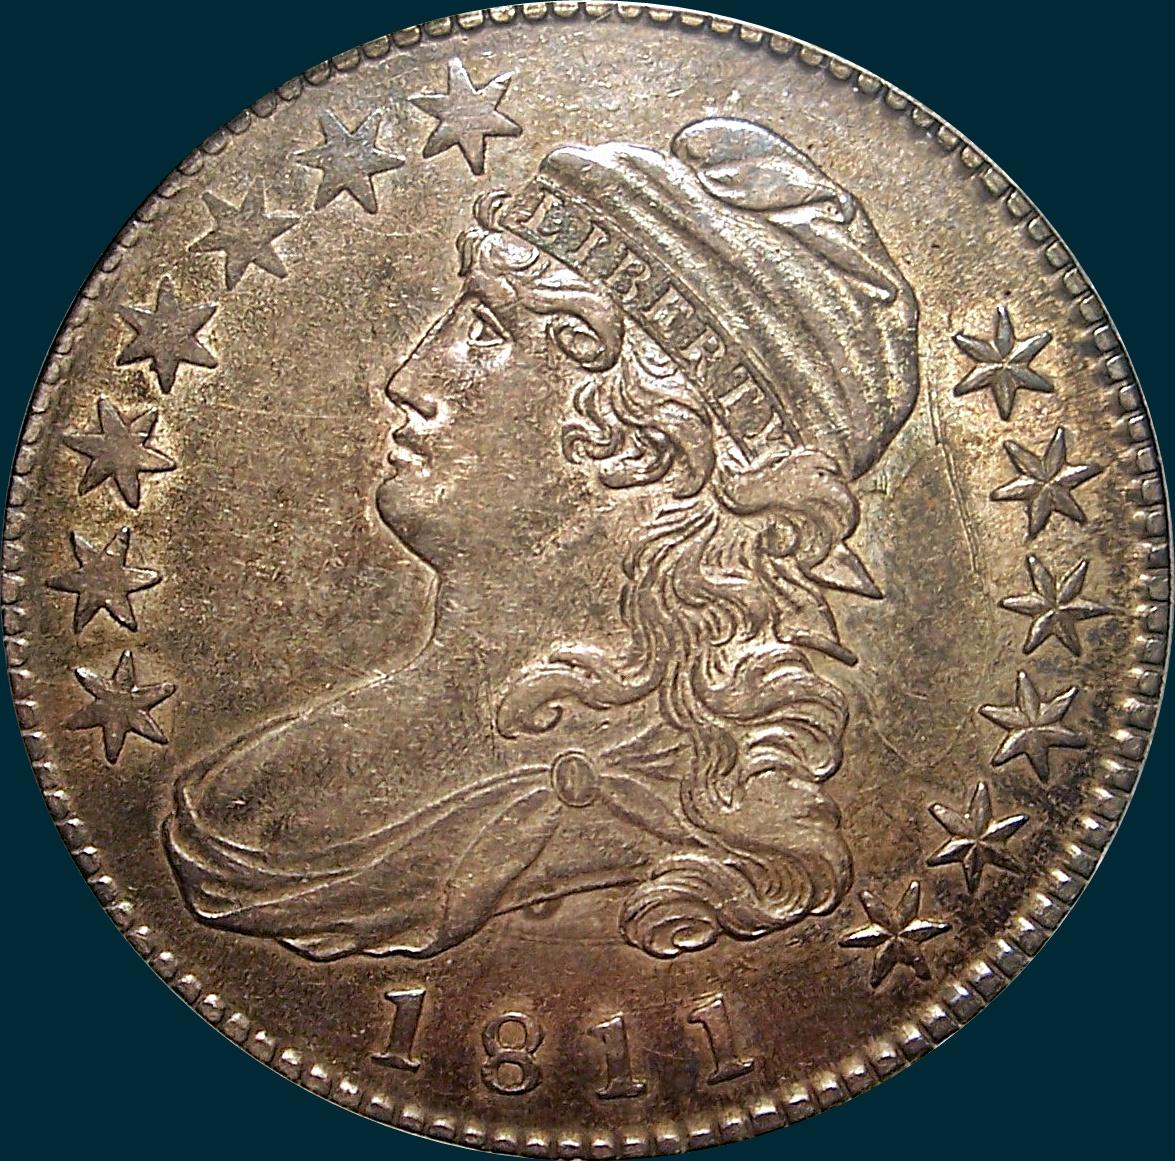 1811 o-111, small 8, capped bust half dollar